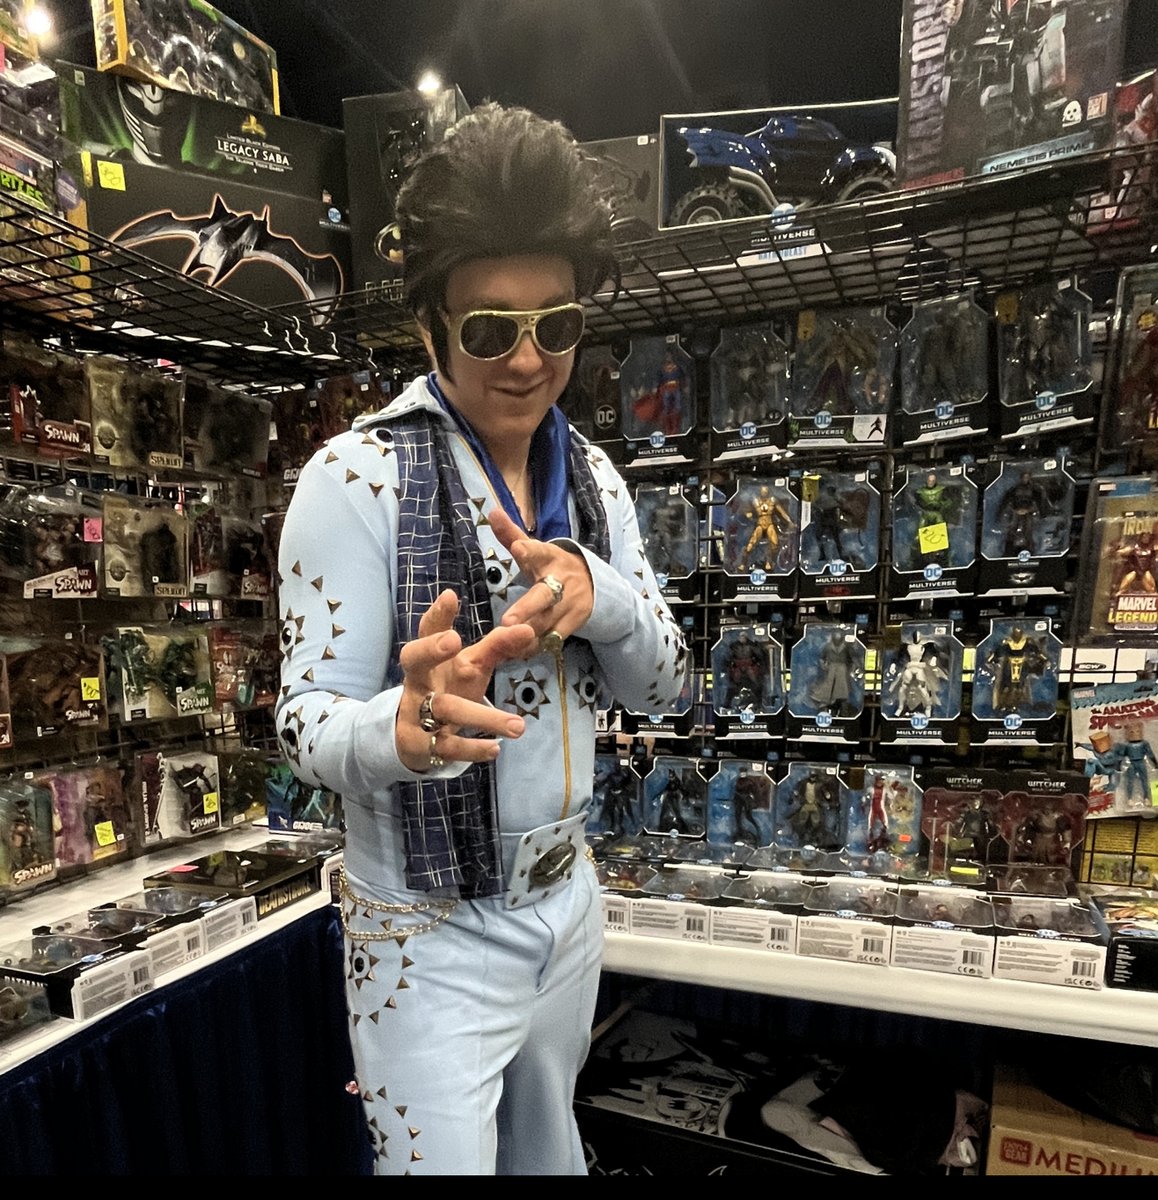 Thank you, thank you very much, for coming to Comicpalooza! Elvis has not left the building.